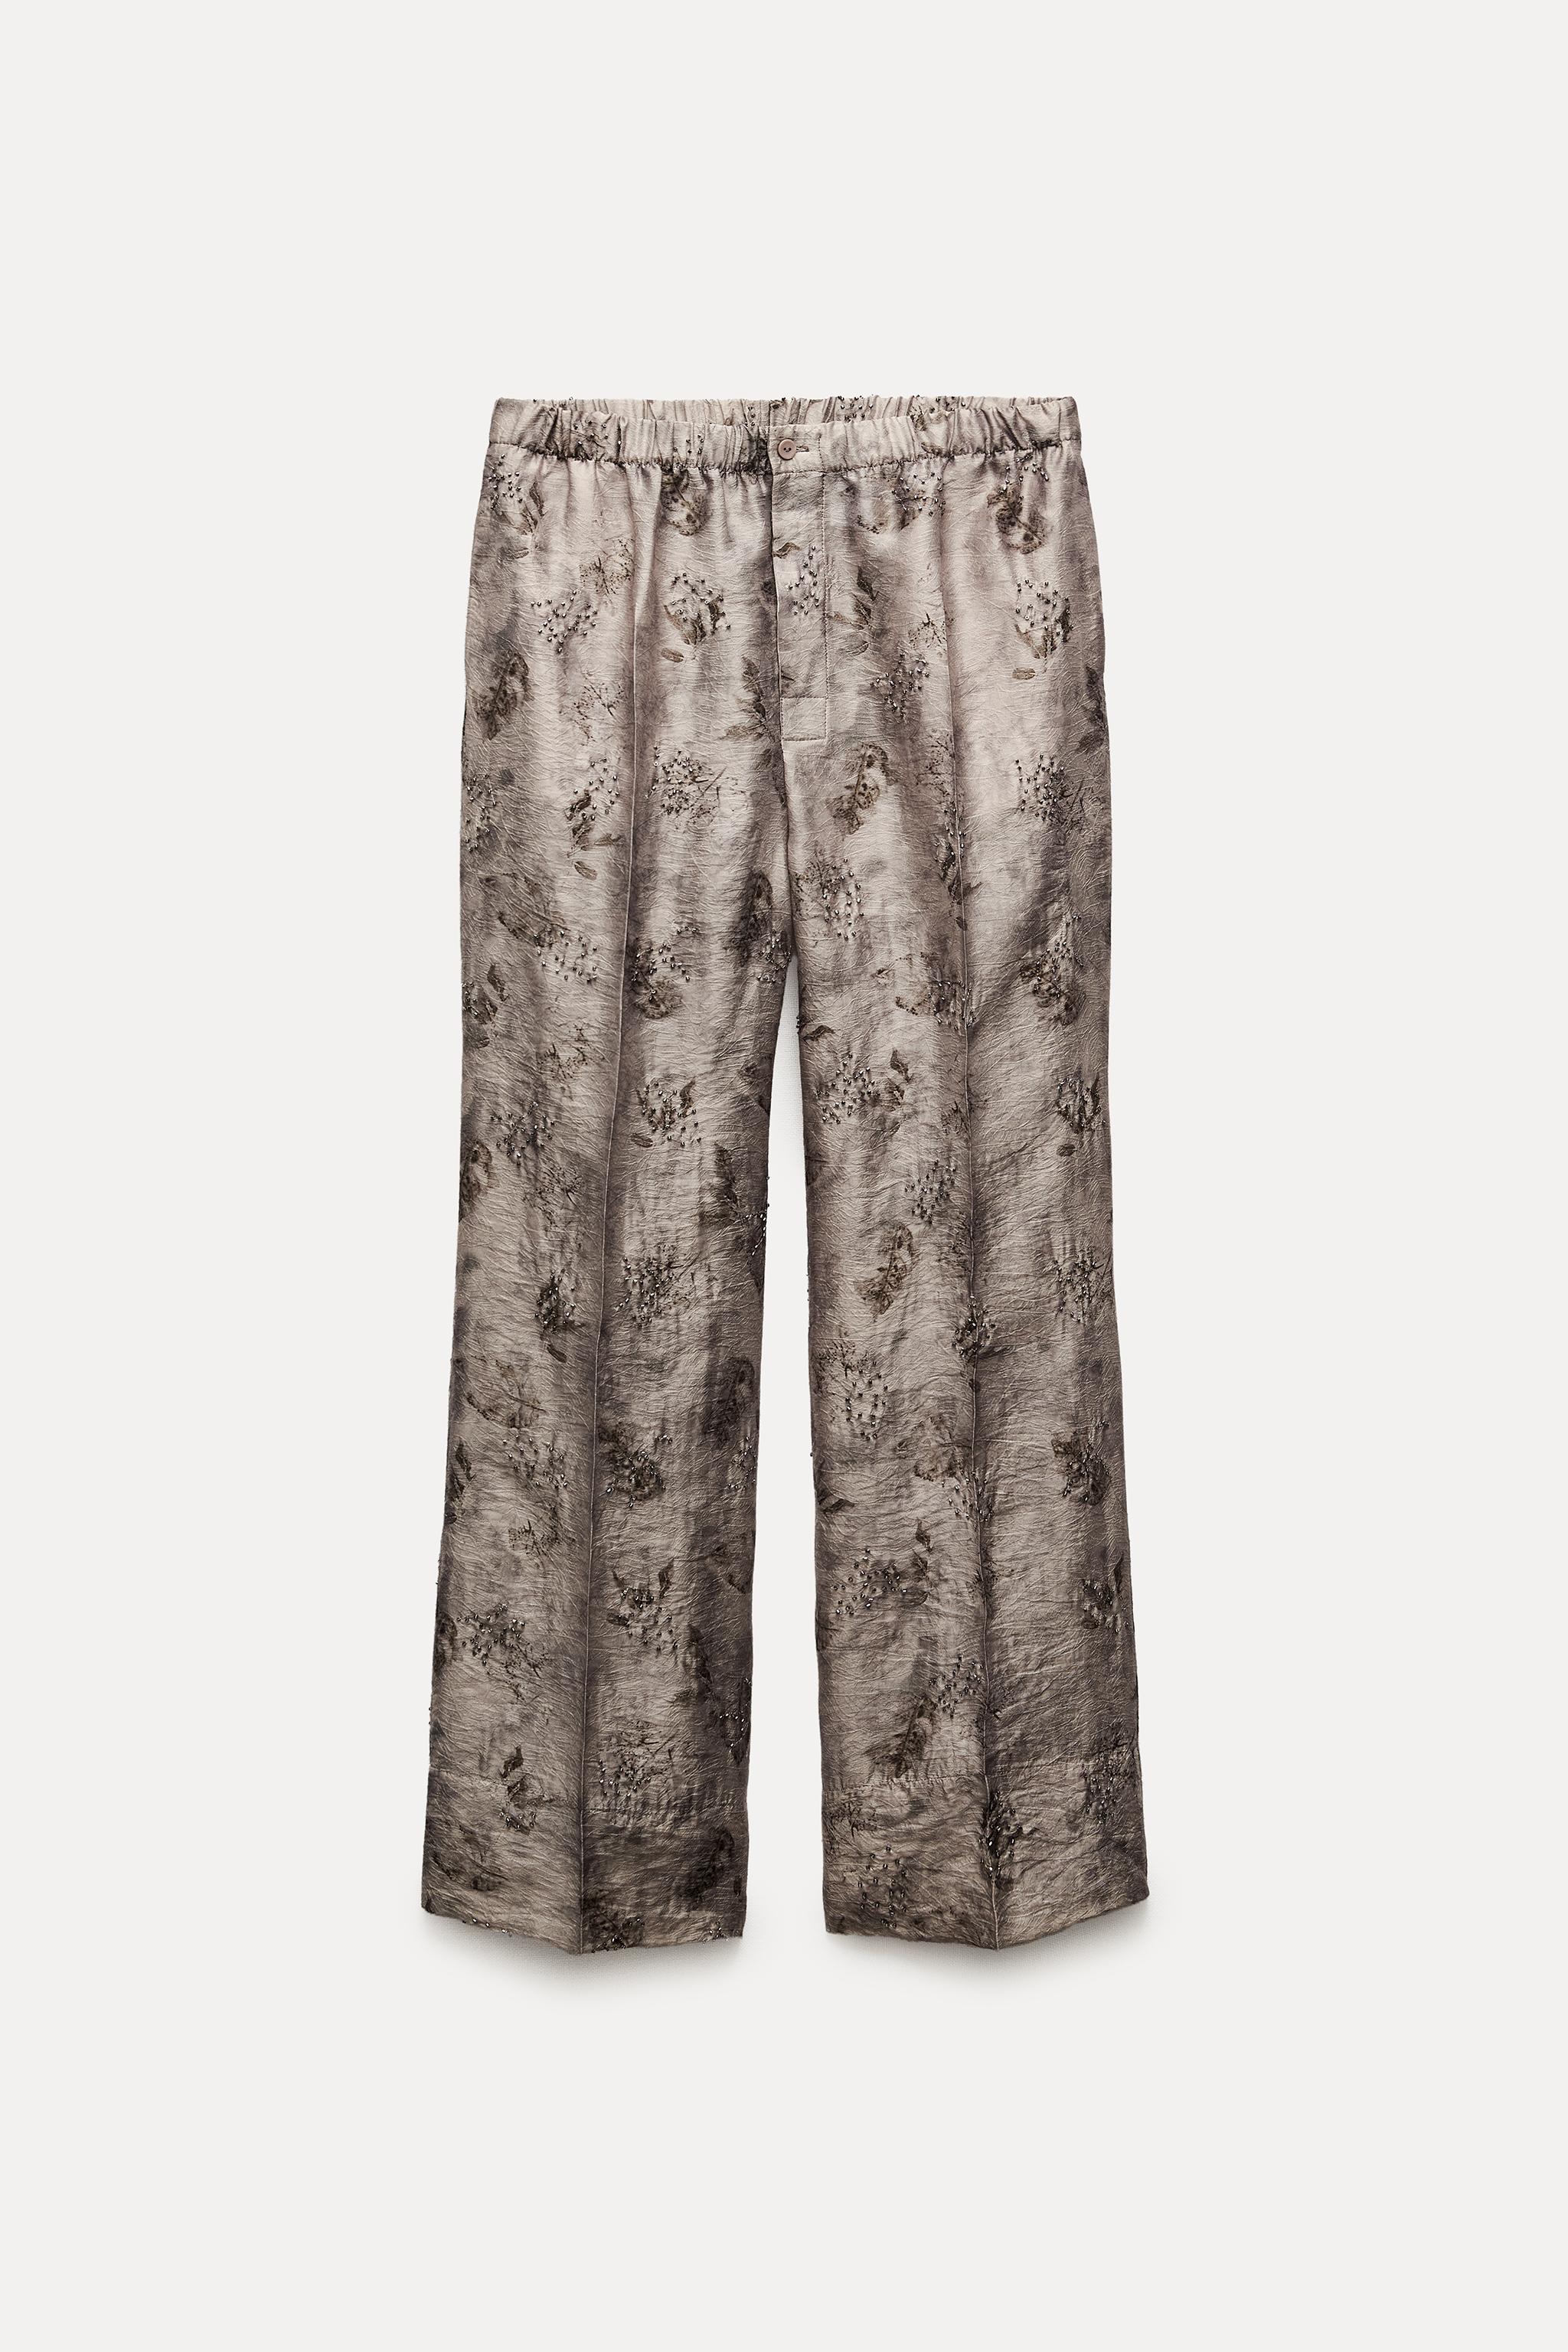 ZW COLLECTION PRINTED EMBROIDERED TROUSERS - Brown / Taupe